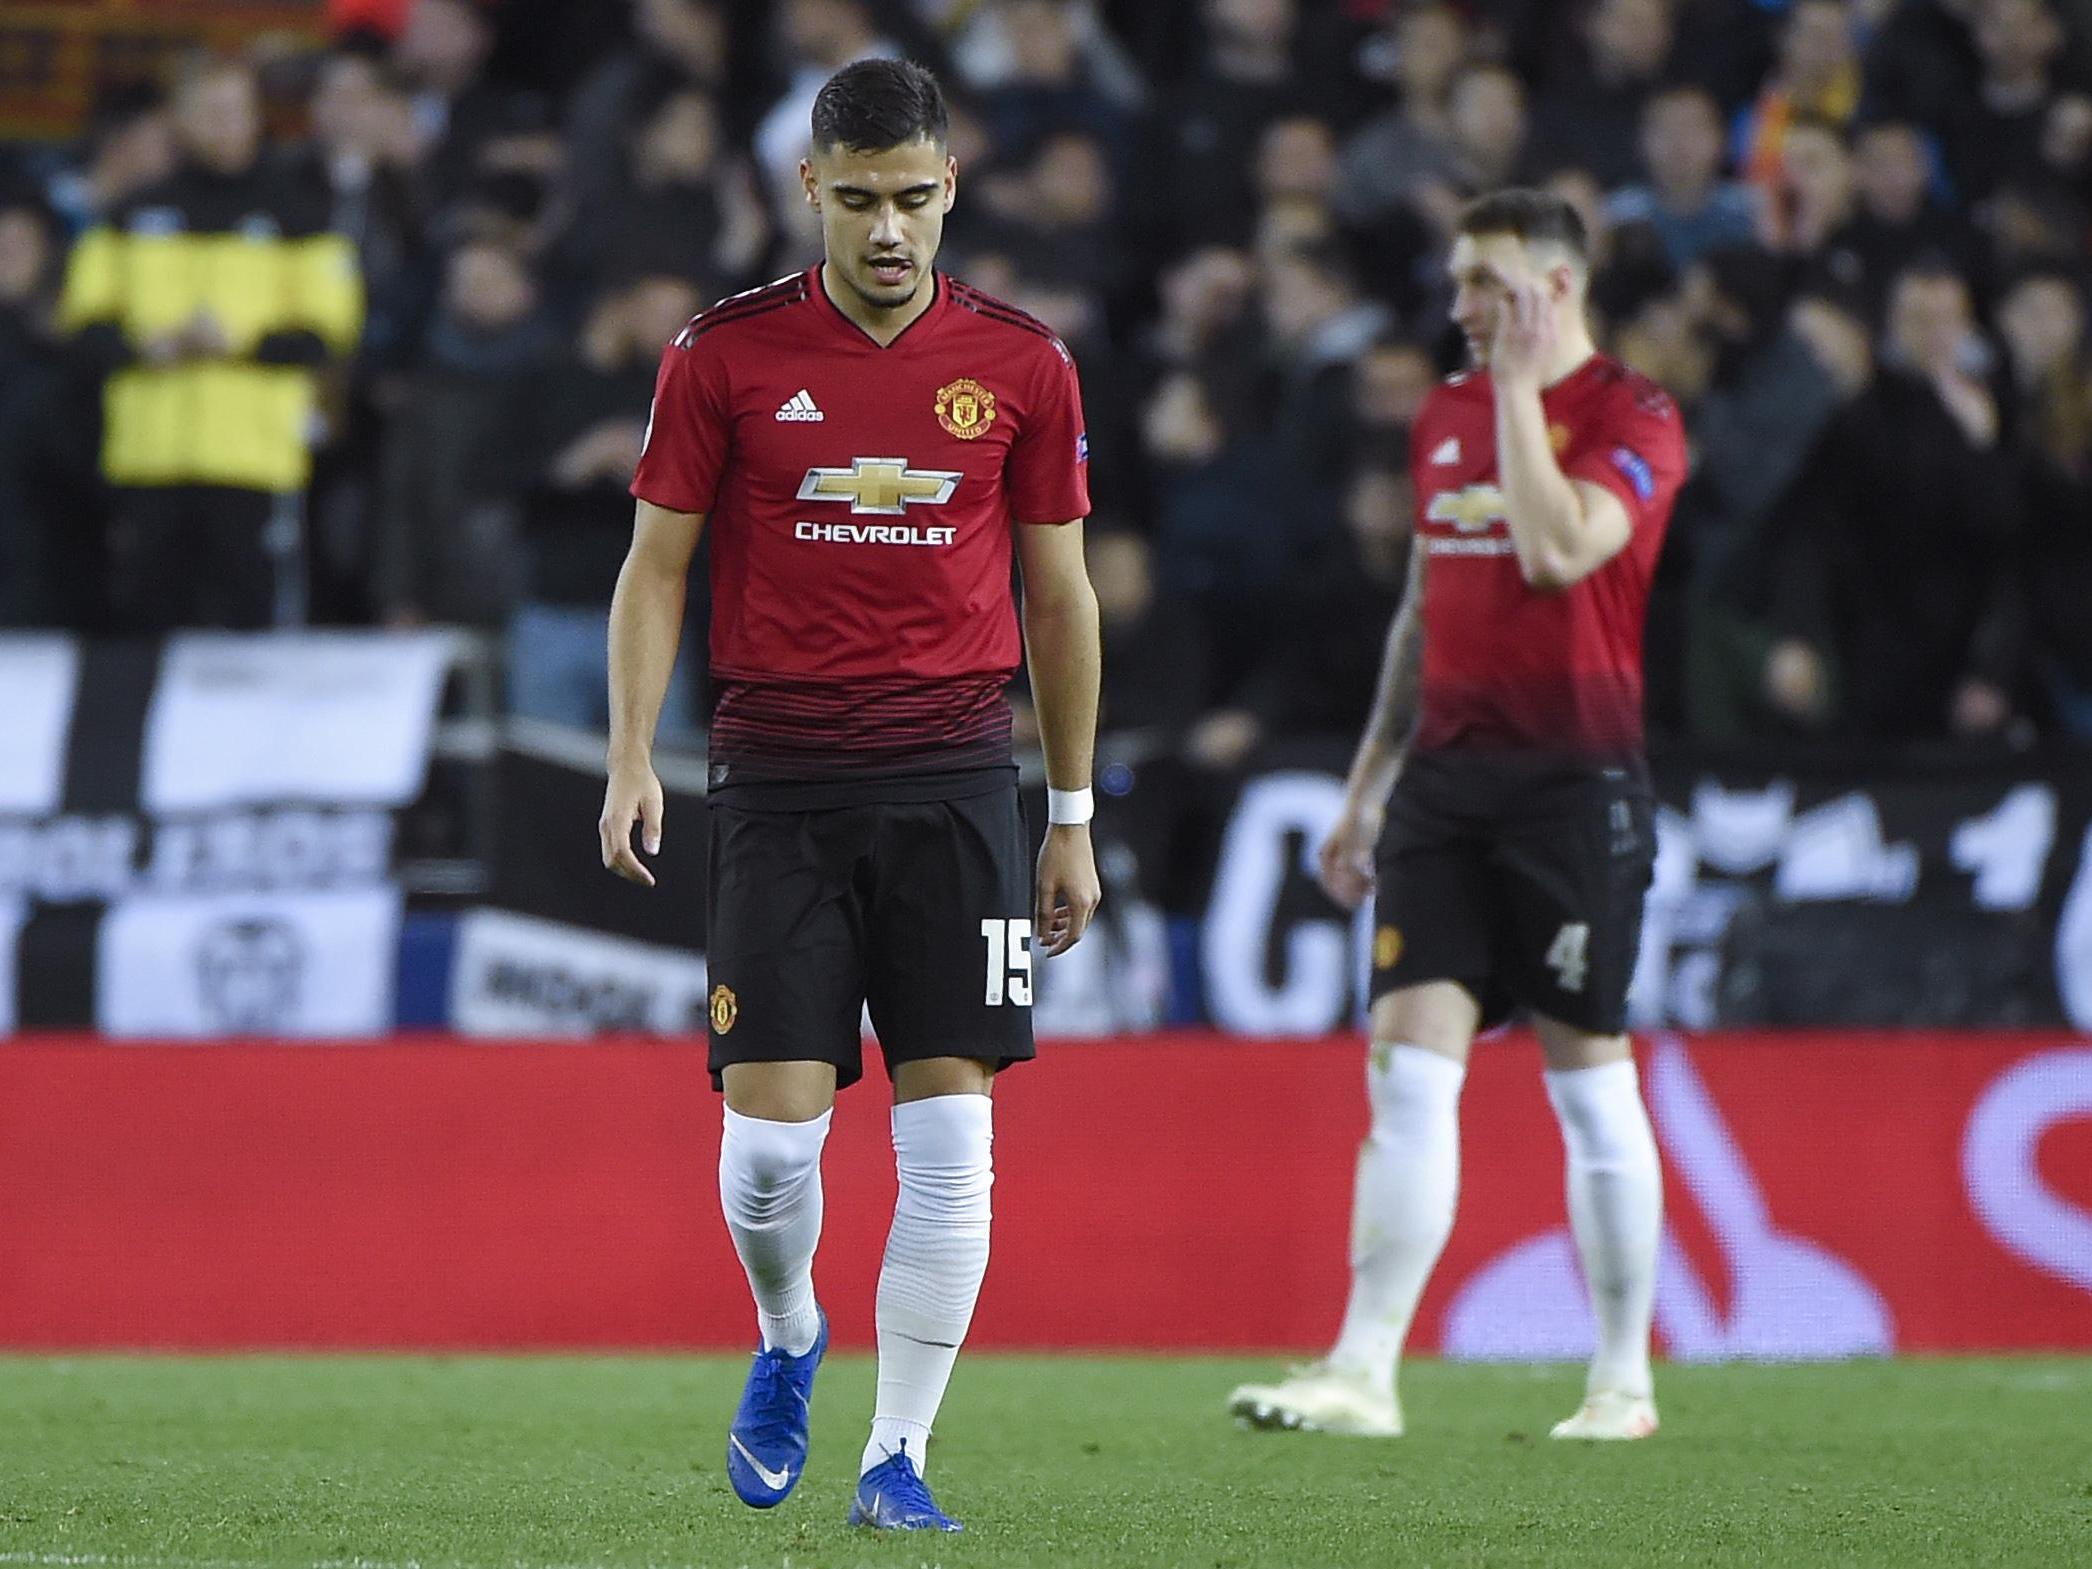 This was a night for Manchester United to forget